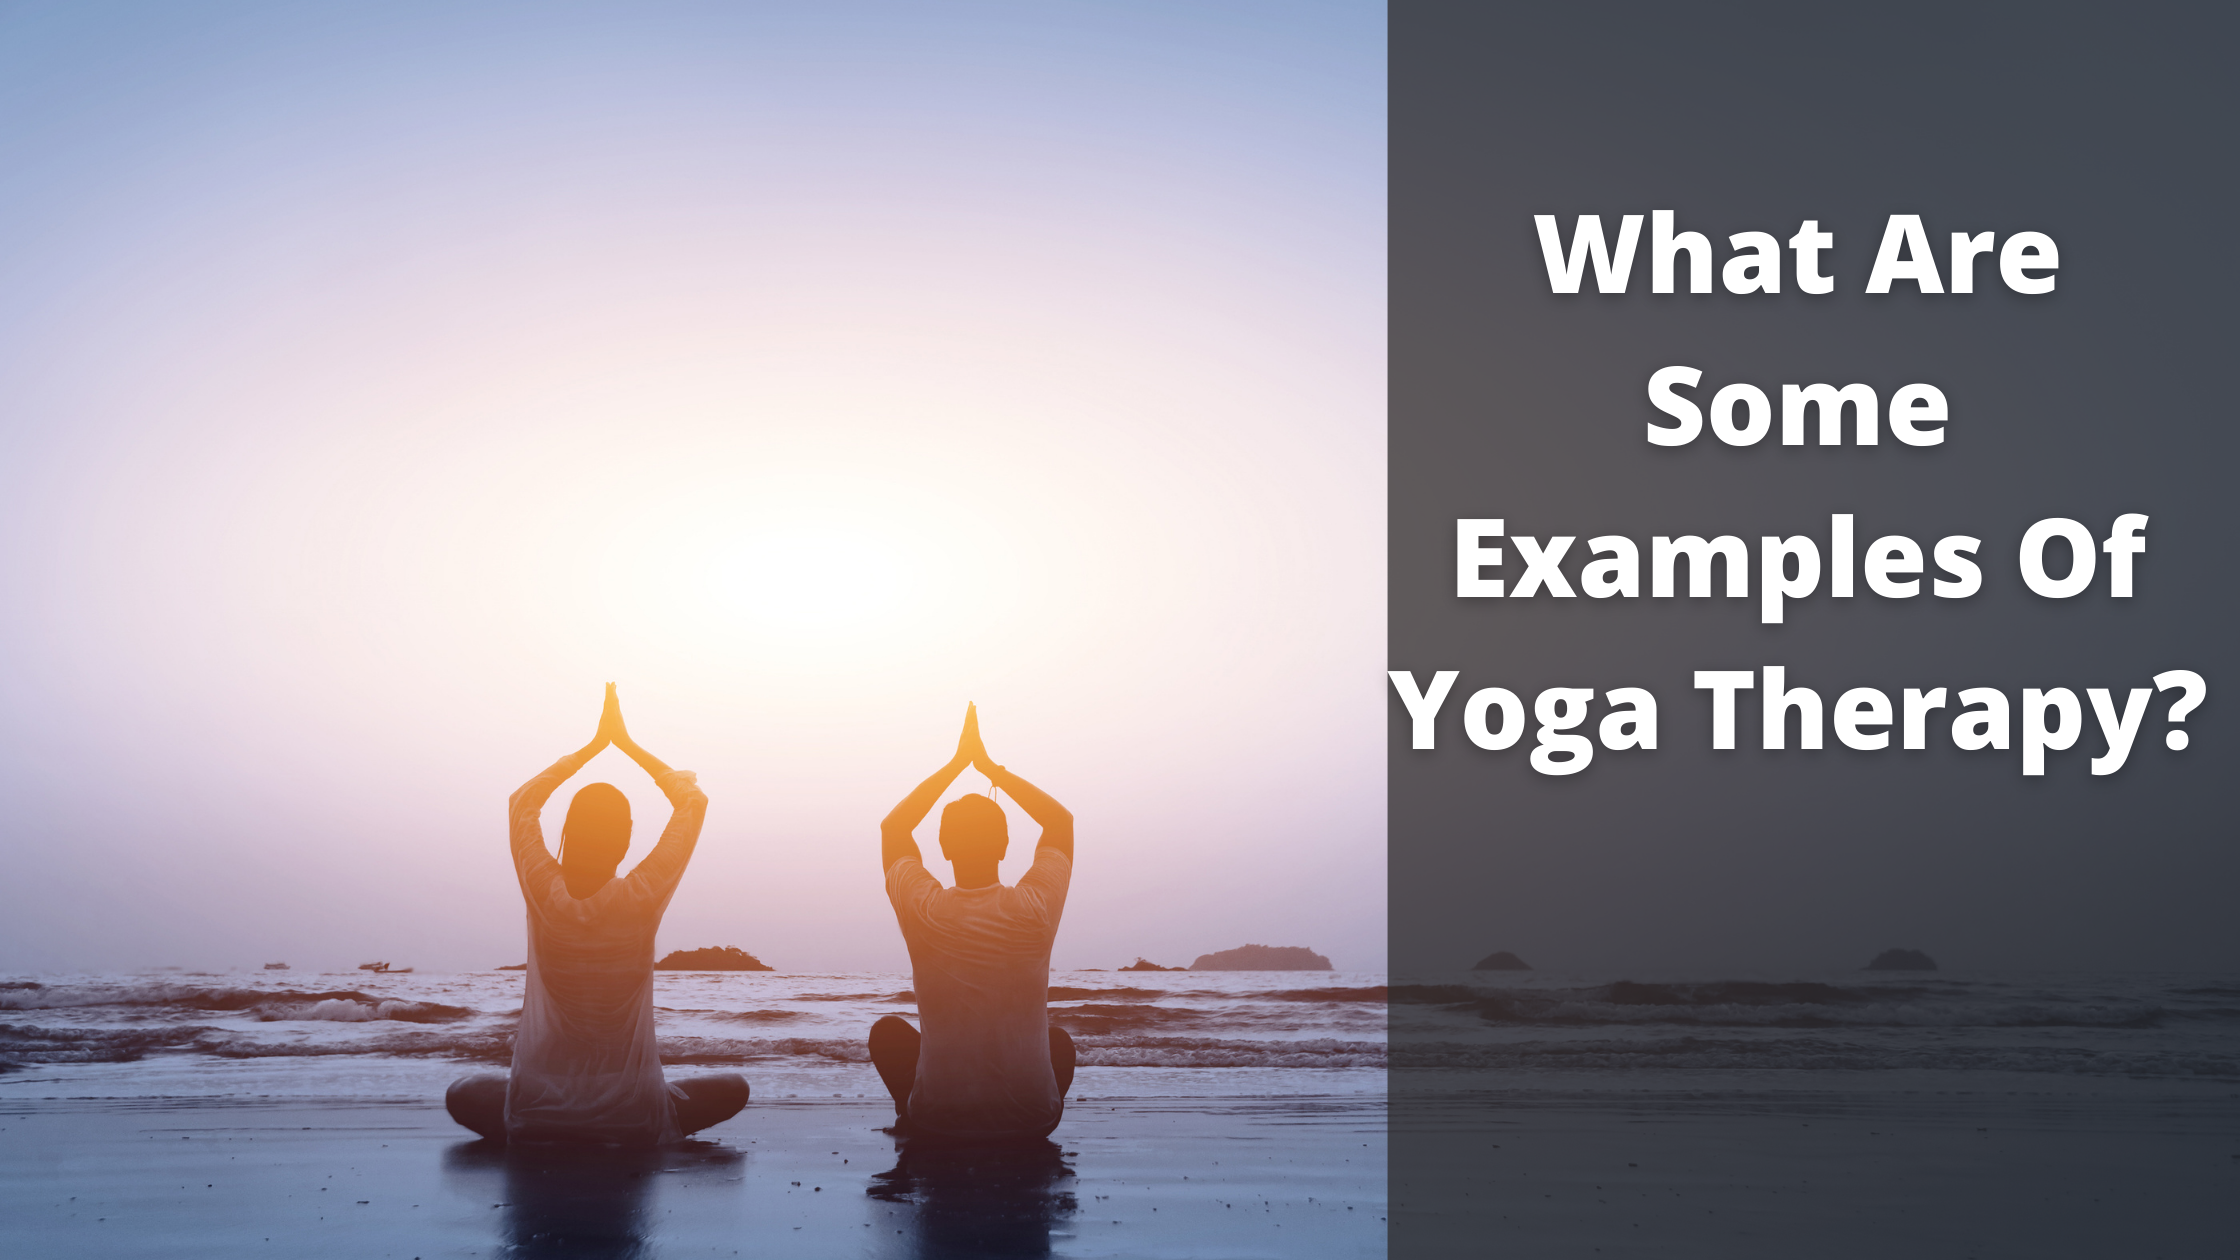 Examples of Yoga Therapy